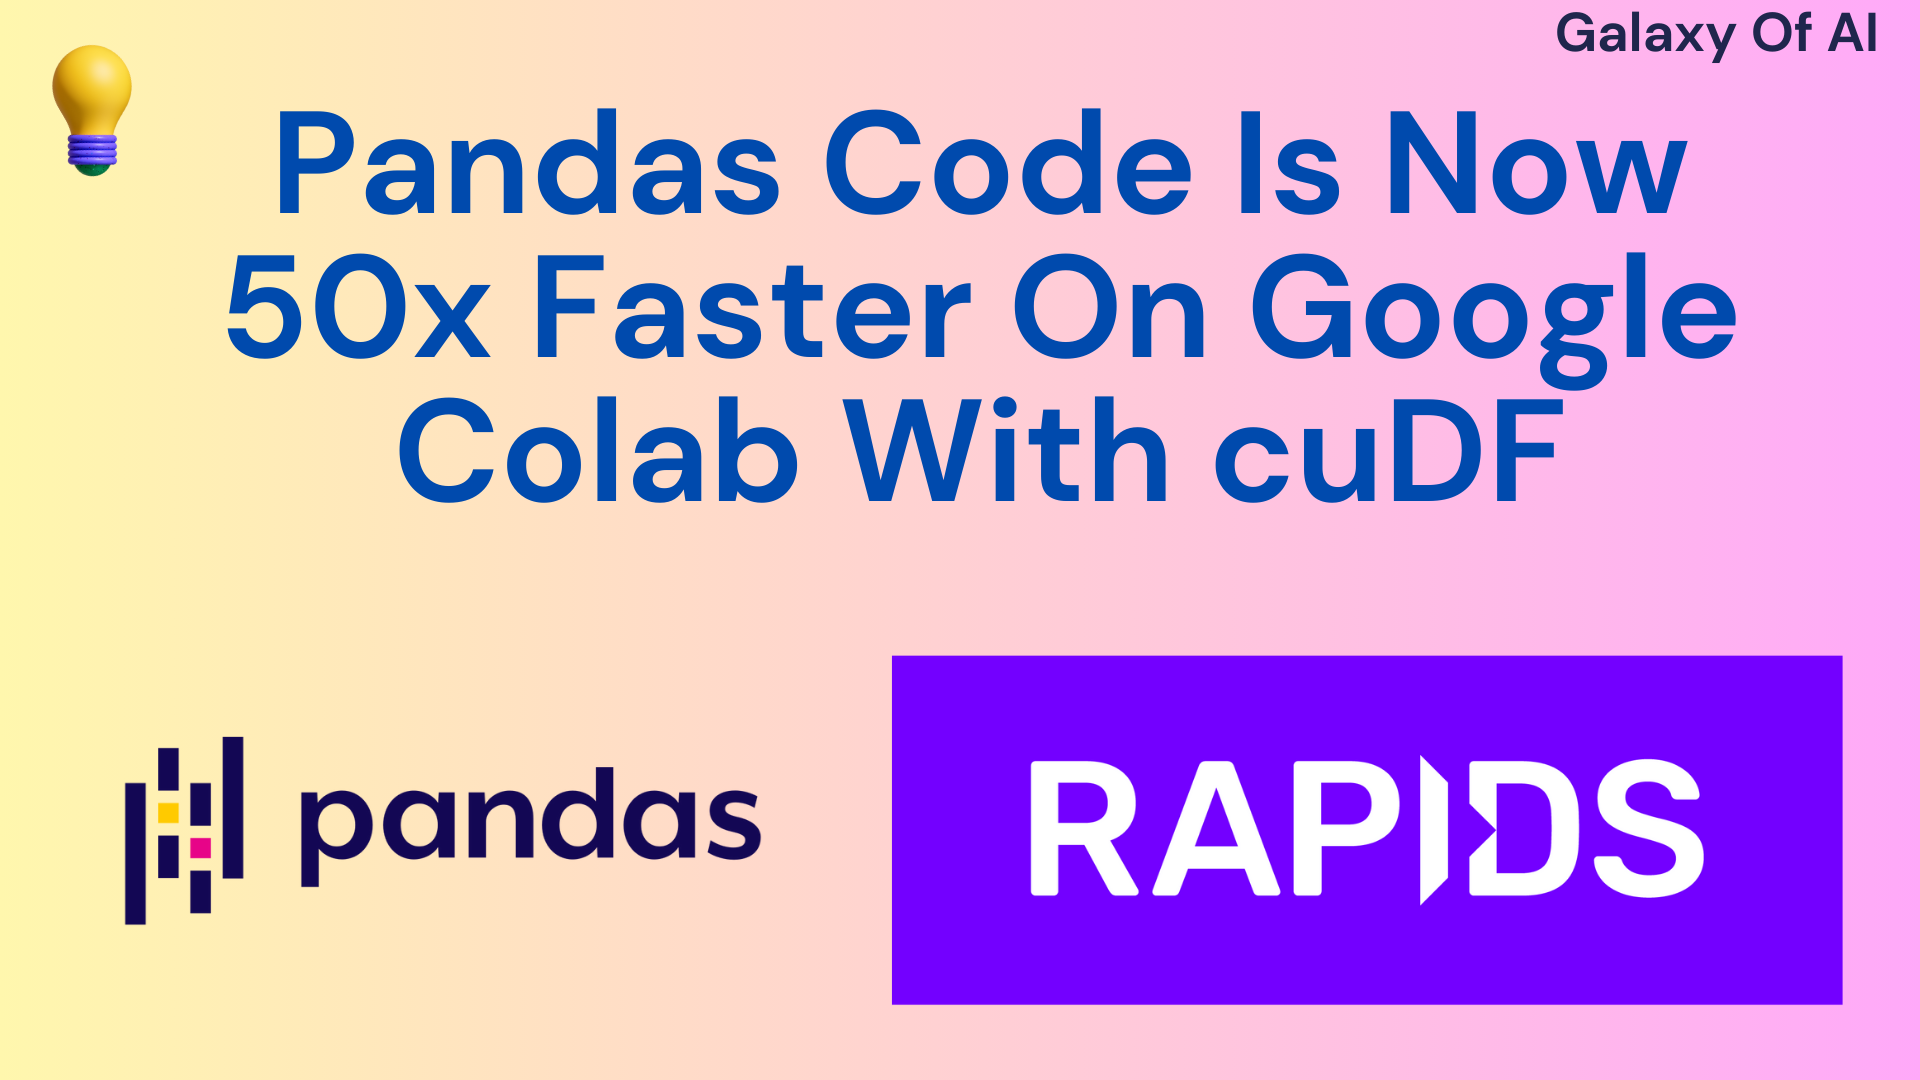 Pandas Code Is Now 50x Faster On Google Colab With cuDF